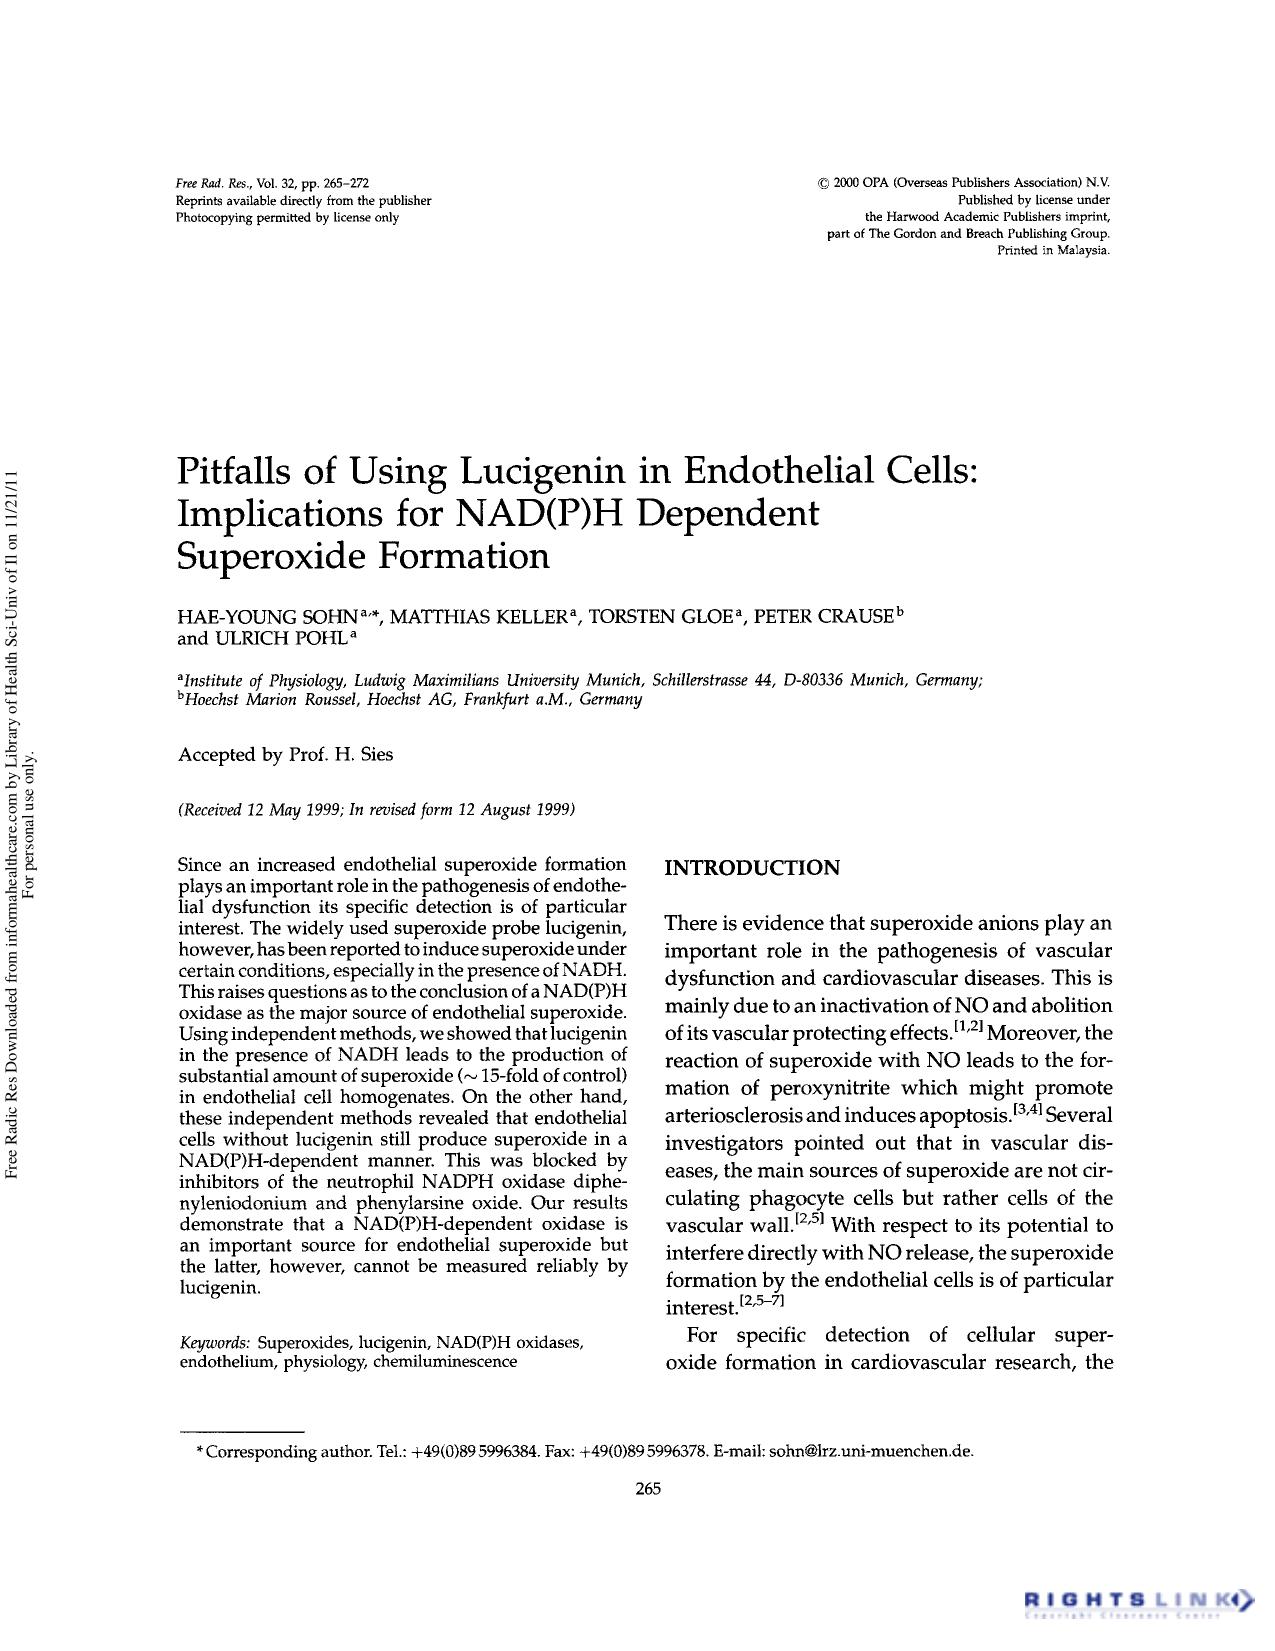 Pitfalls of using lucigenin in endothelial cells: Implications for NAD(P)H dependent superoxide formation by Hae-Young Sohn Matthias Keller Torsten Gloe Peter Crause & Ulrich Pohl